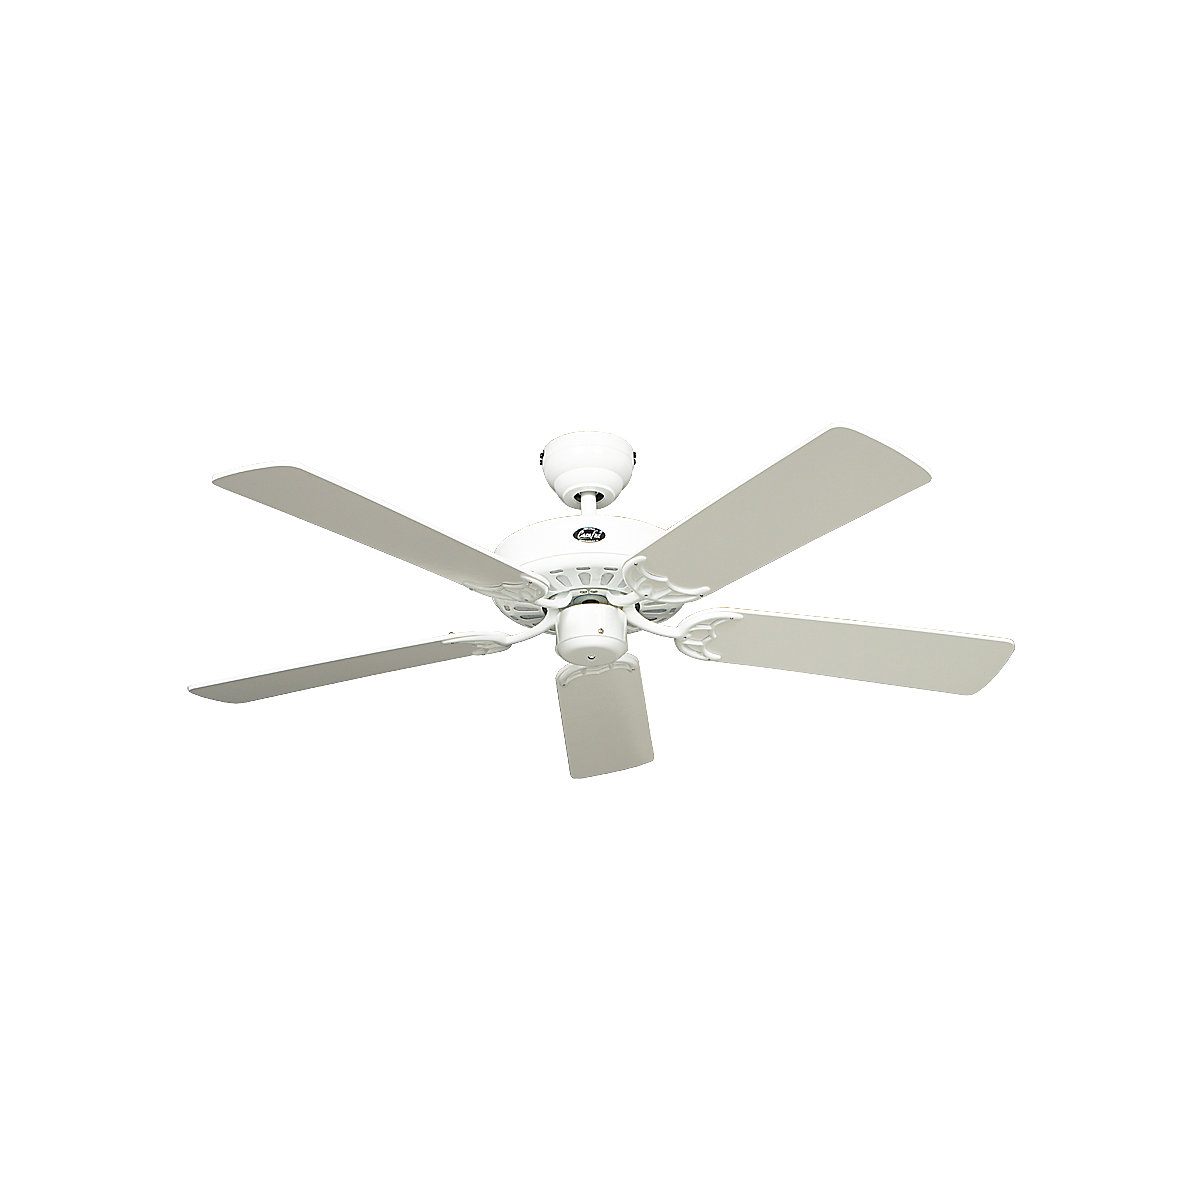 CLASSIC ROYAL ceiling fan, rotor blade Ø 1030 mm, painted white-5